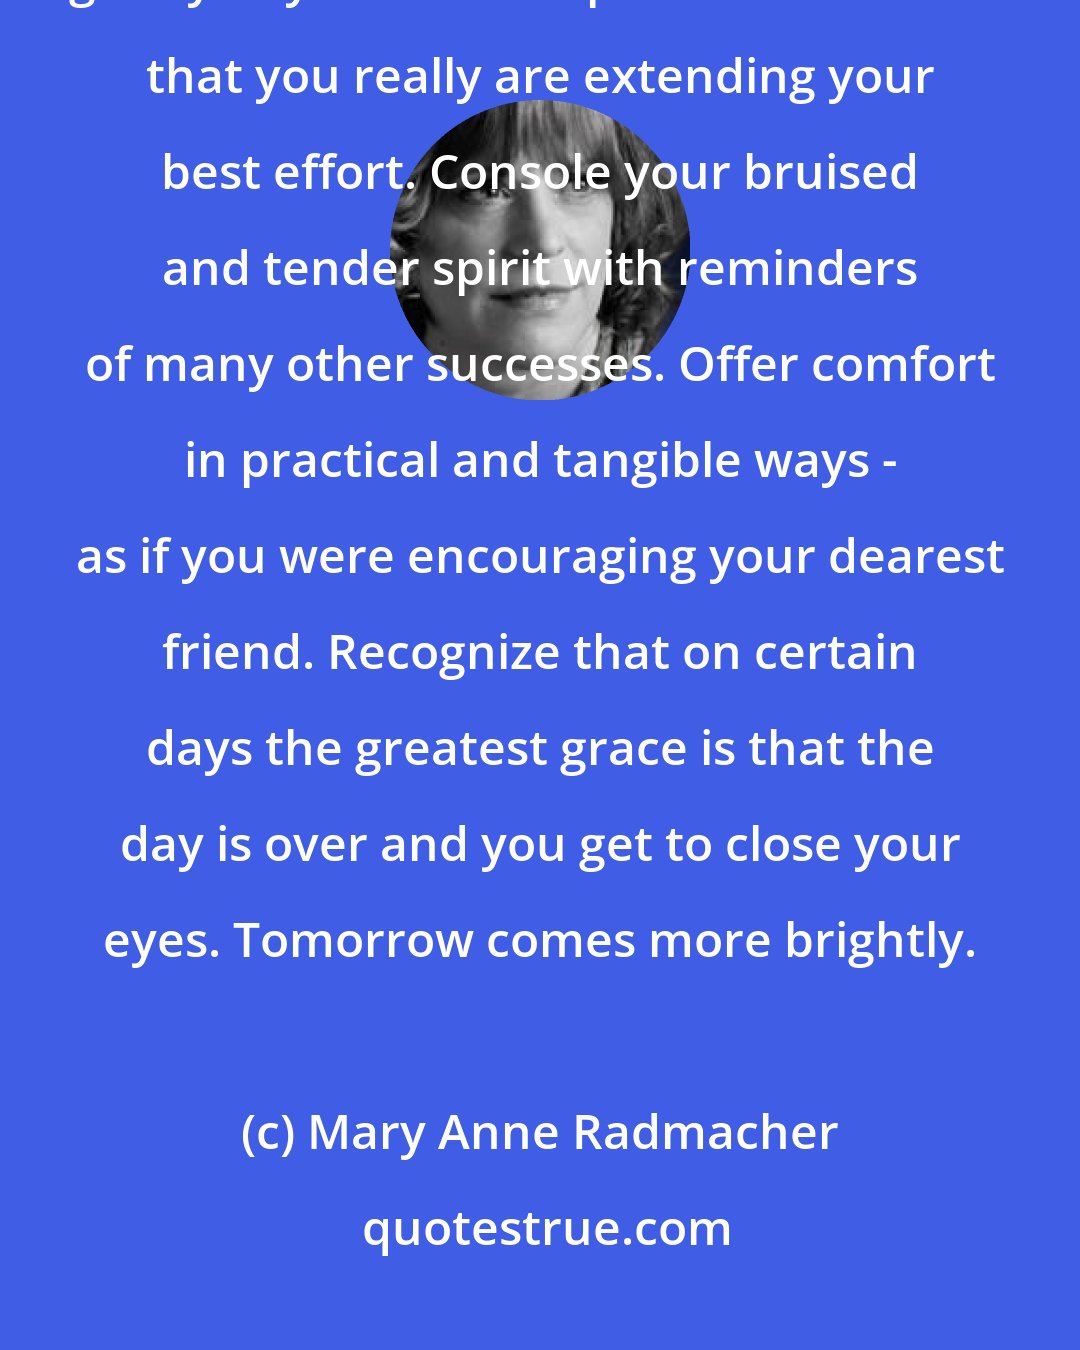 Mary Anne Radmacher: Speak quietly to yourself and promise there will be better days. Whisper gently to yourself and provide assurance that you really are extending your best effort. Console your bruised and tender spirit with reminders of many other successes. Offer comfort in practical and tangible ways - as if you were encouraging your dearest friend. Recognize that on certain days the greatest grace is that the day is over and you get to close your eyes. Tomorrow comes more brightly.